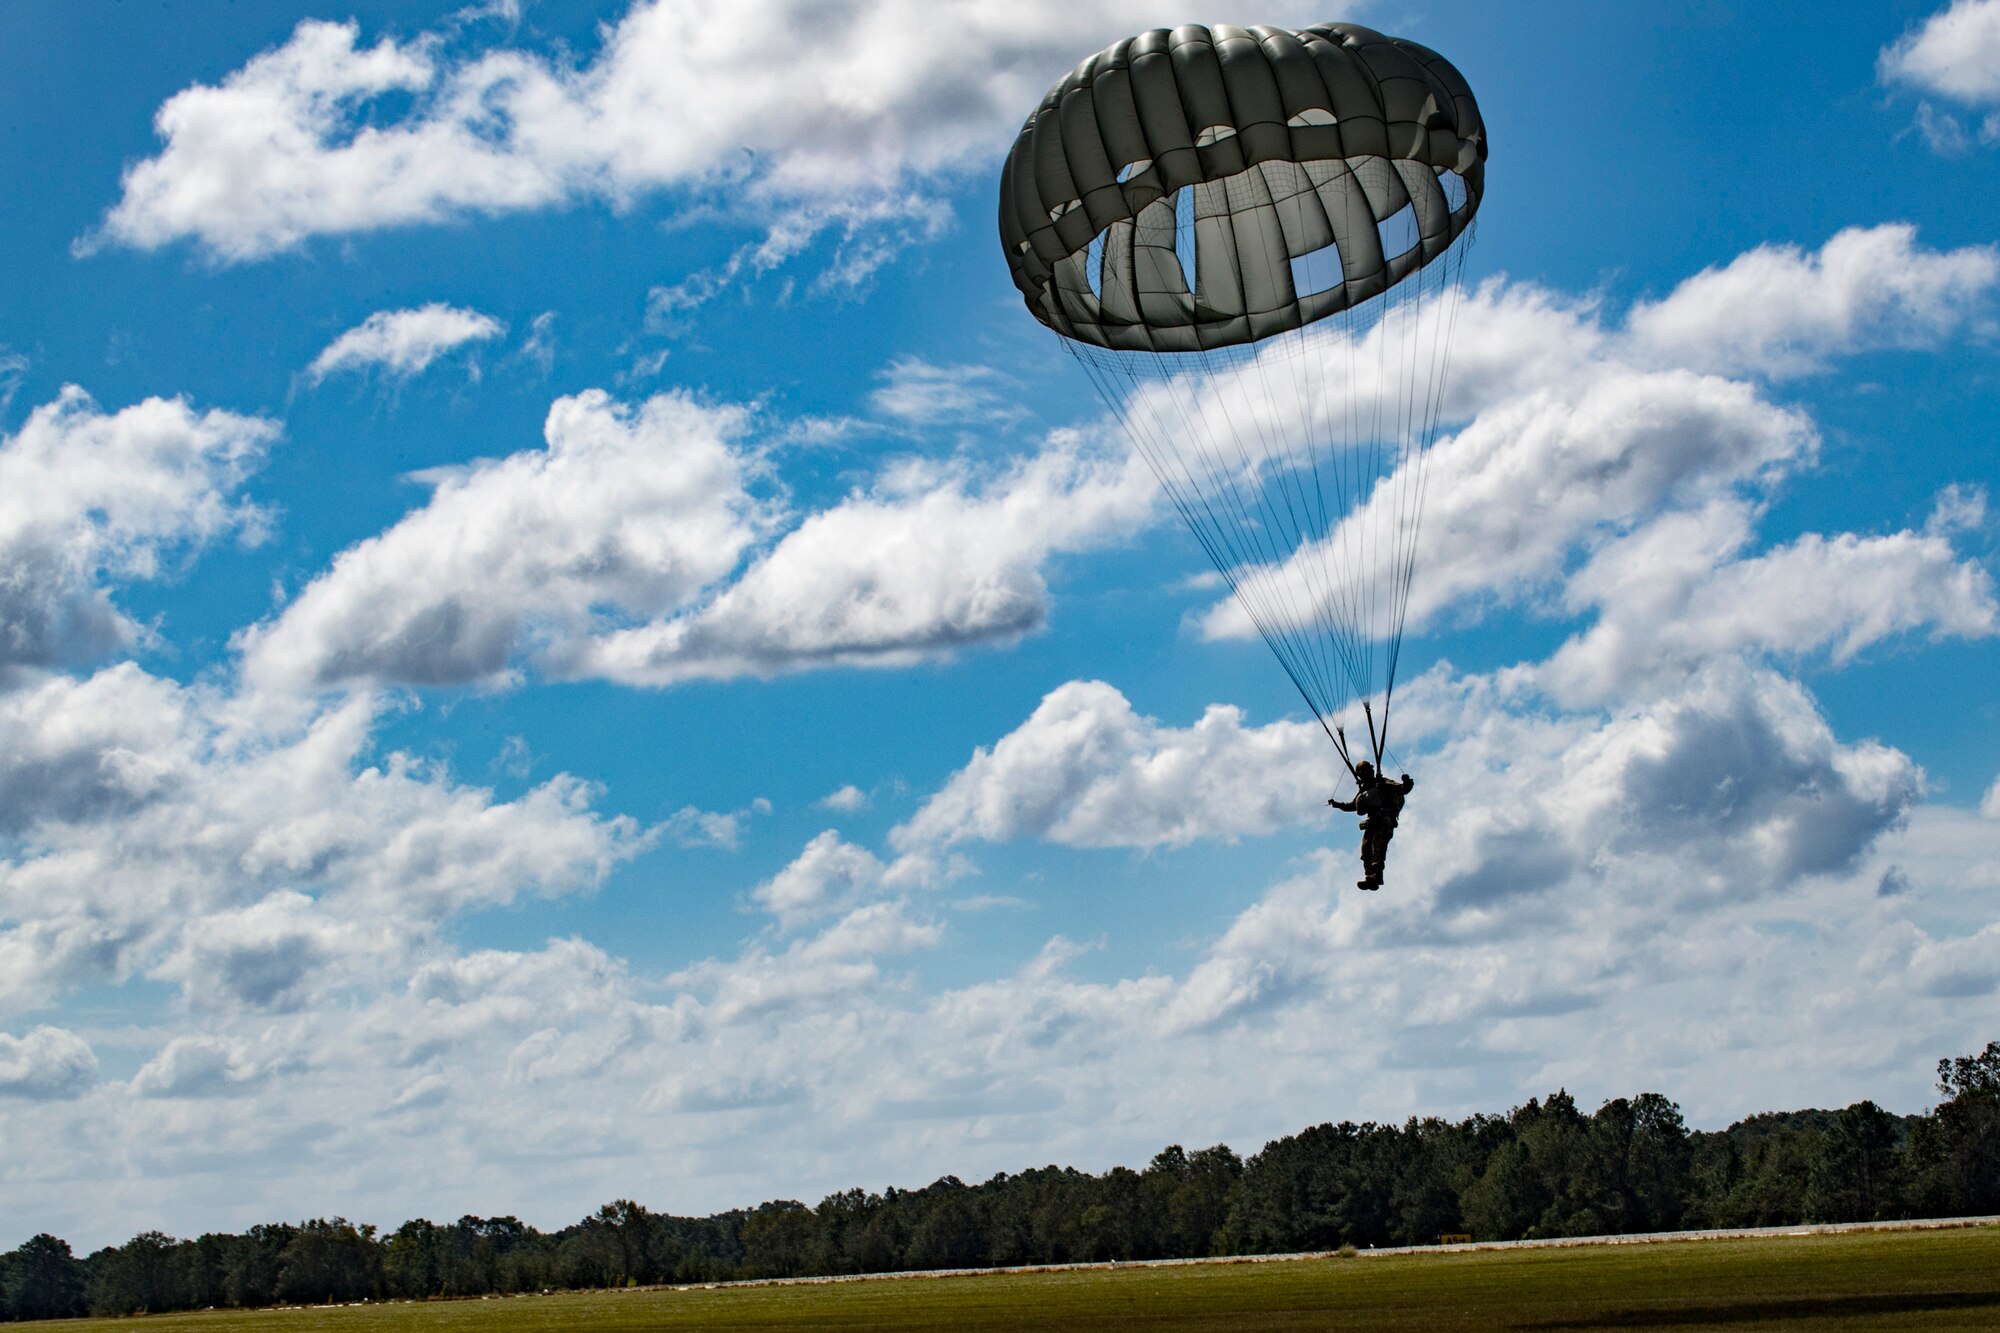 A member of the 820th Base Defense Group (BDG) descends during a static-line jump, Oct. 3, 2017, at the Lee Fulp drop zone in Tifton, Ga. The 820th Combat Operations Squadron’s four-person shop of parachute riggers are responsible for ensuring every 820th BDG parachute is serviceable, while also ensuring ground safety at the drop zone. The team has packed and inspected more than 490 parachutes in 2017. (U.S. Air Force photo by Airman 1st Class Daniel Snider)